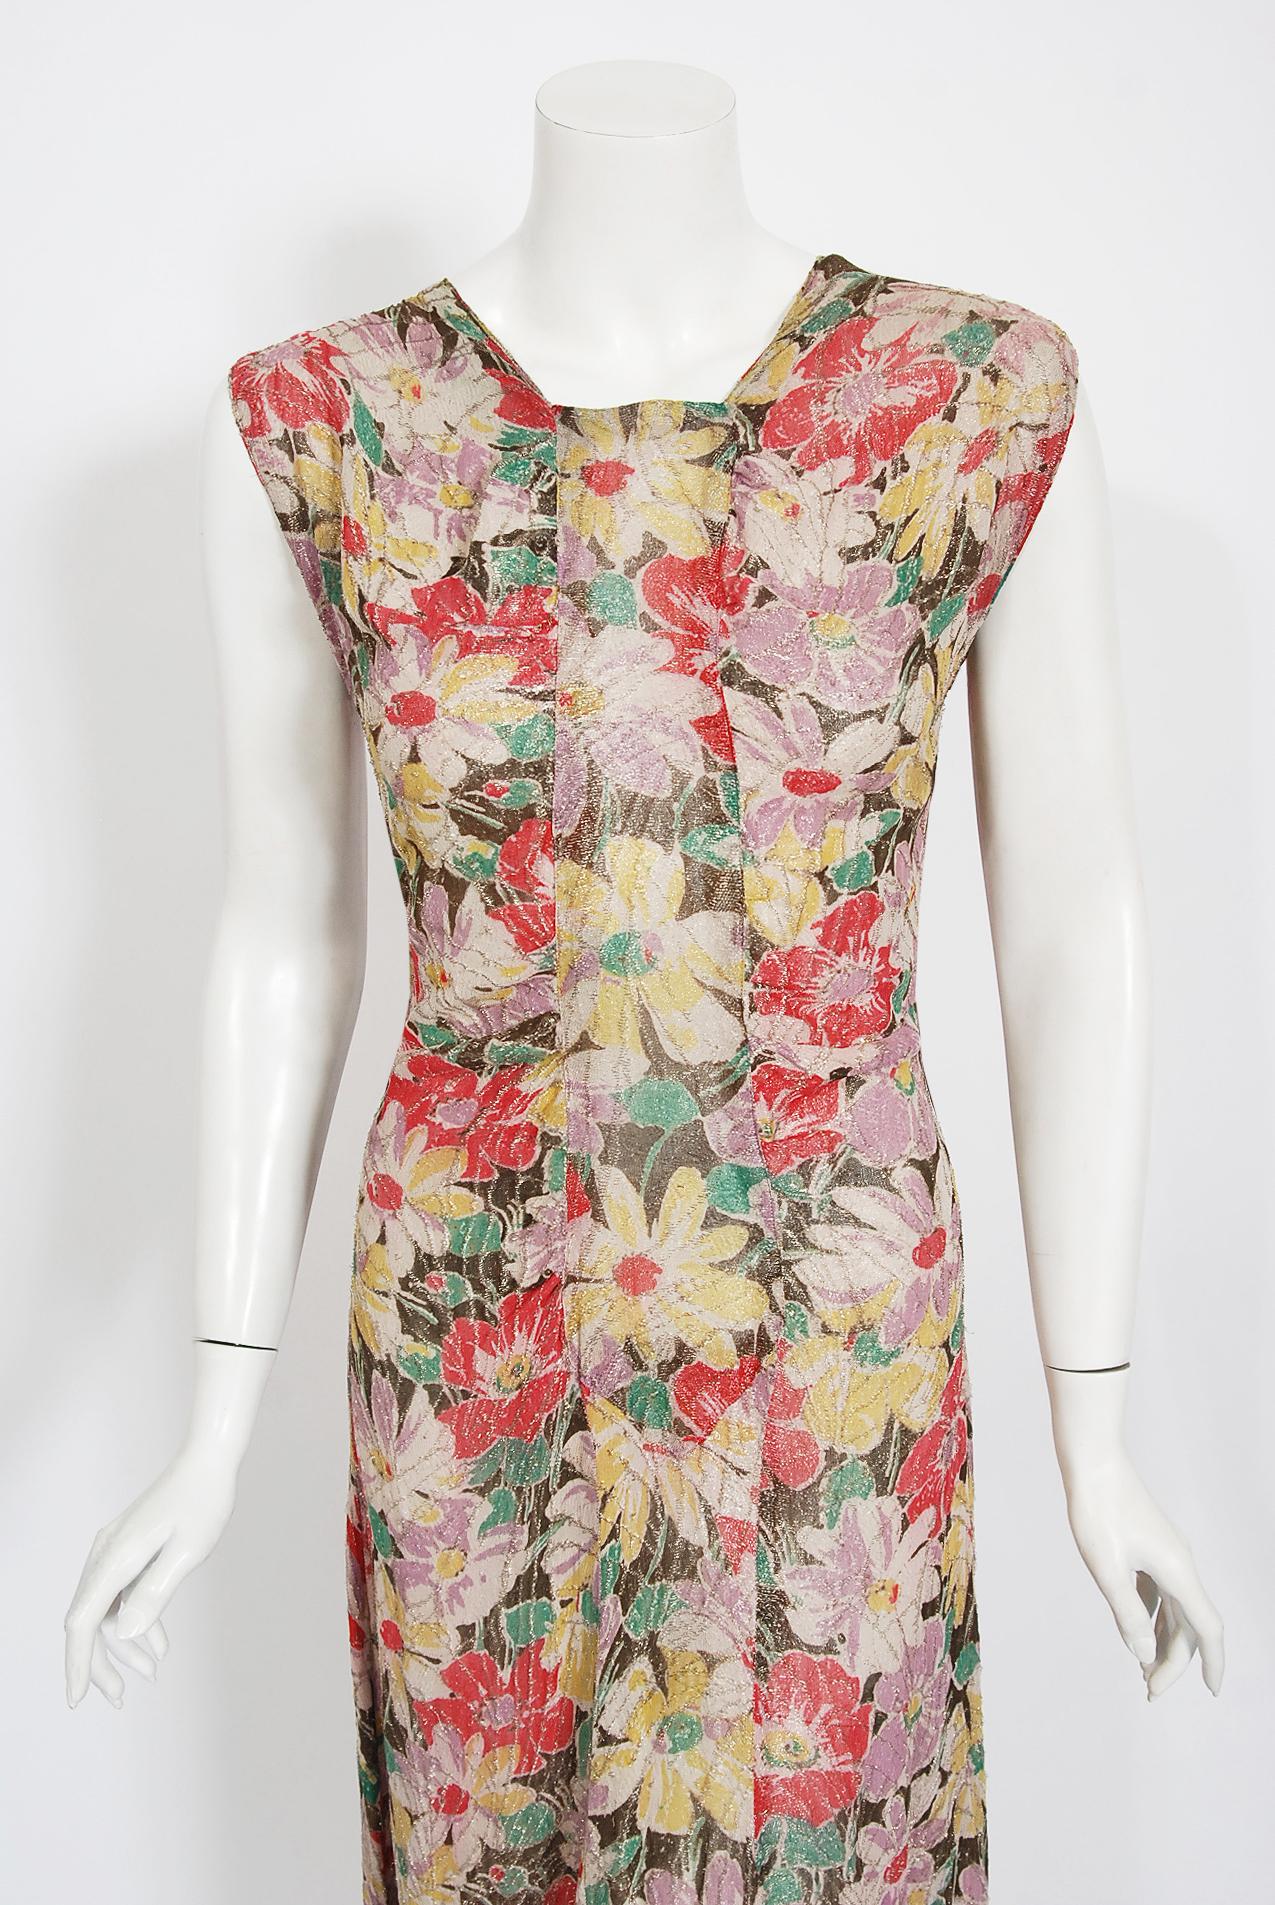 A luxurious, floral print shimmer lamé dress from the 